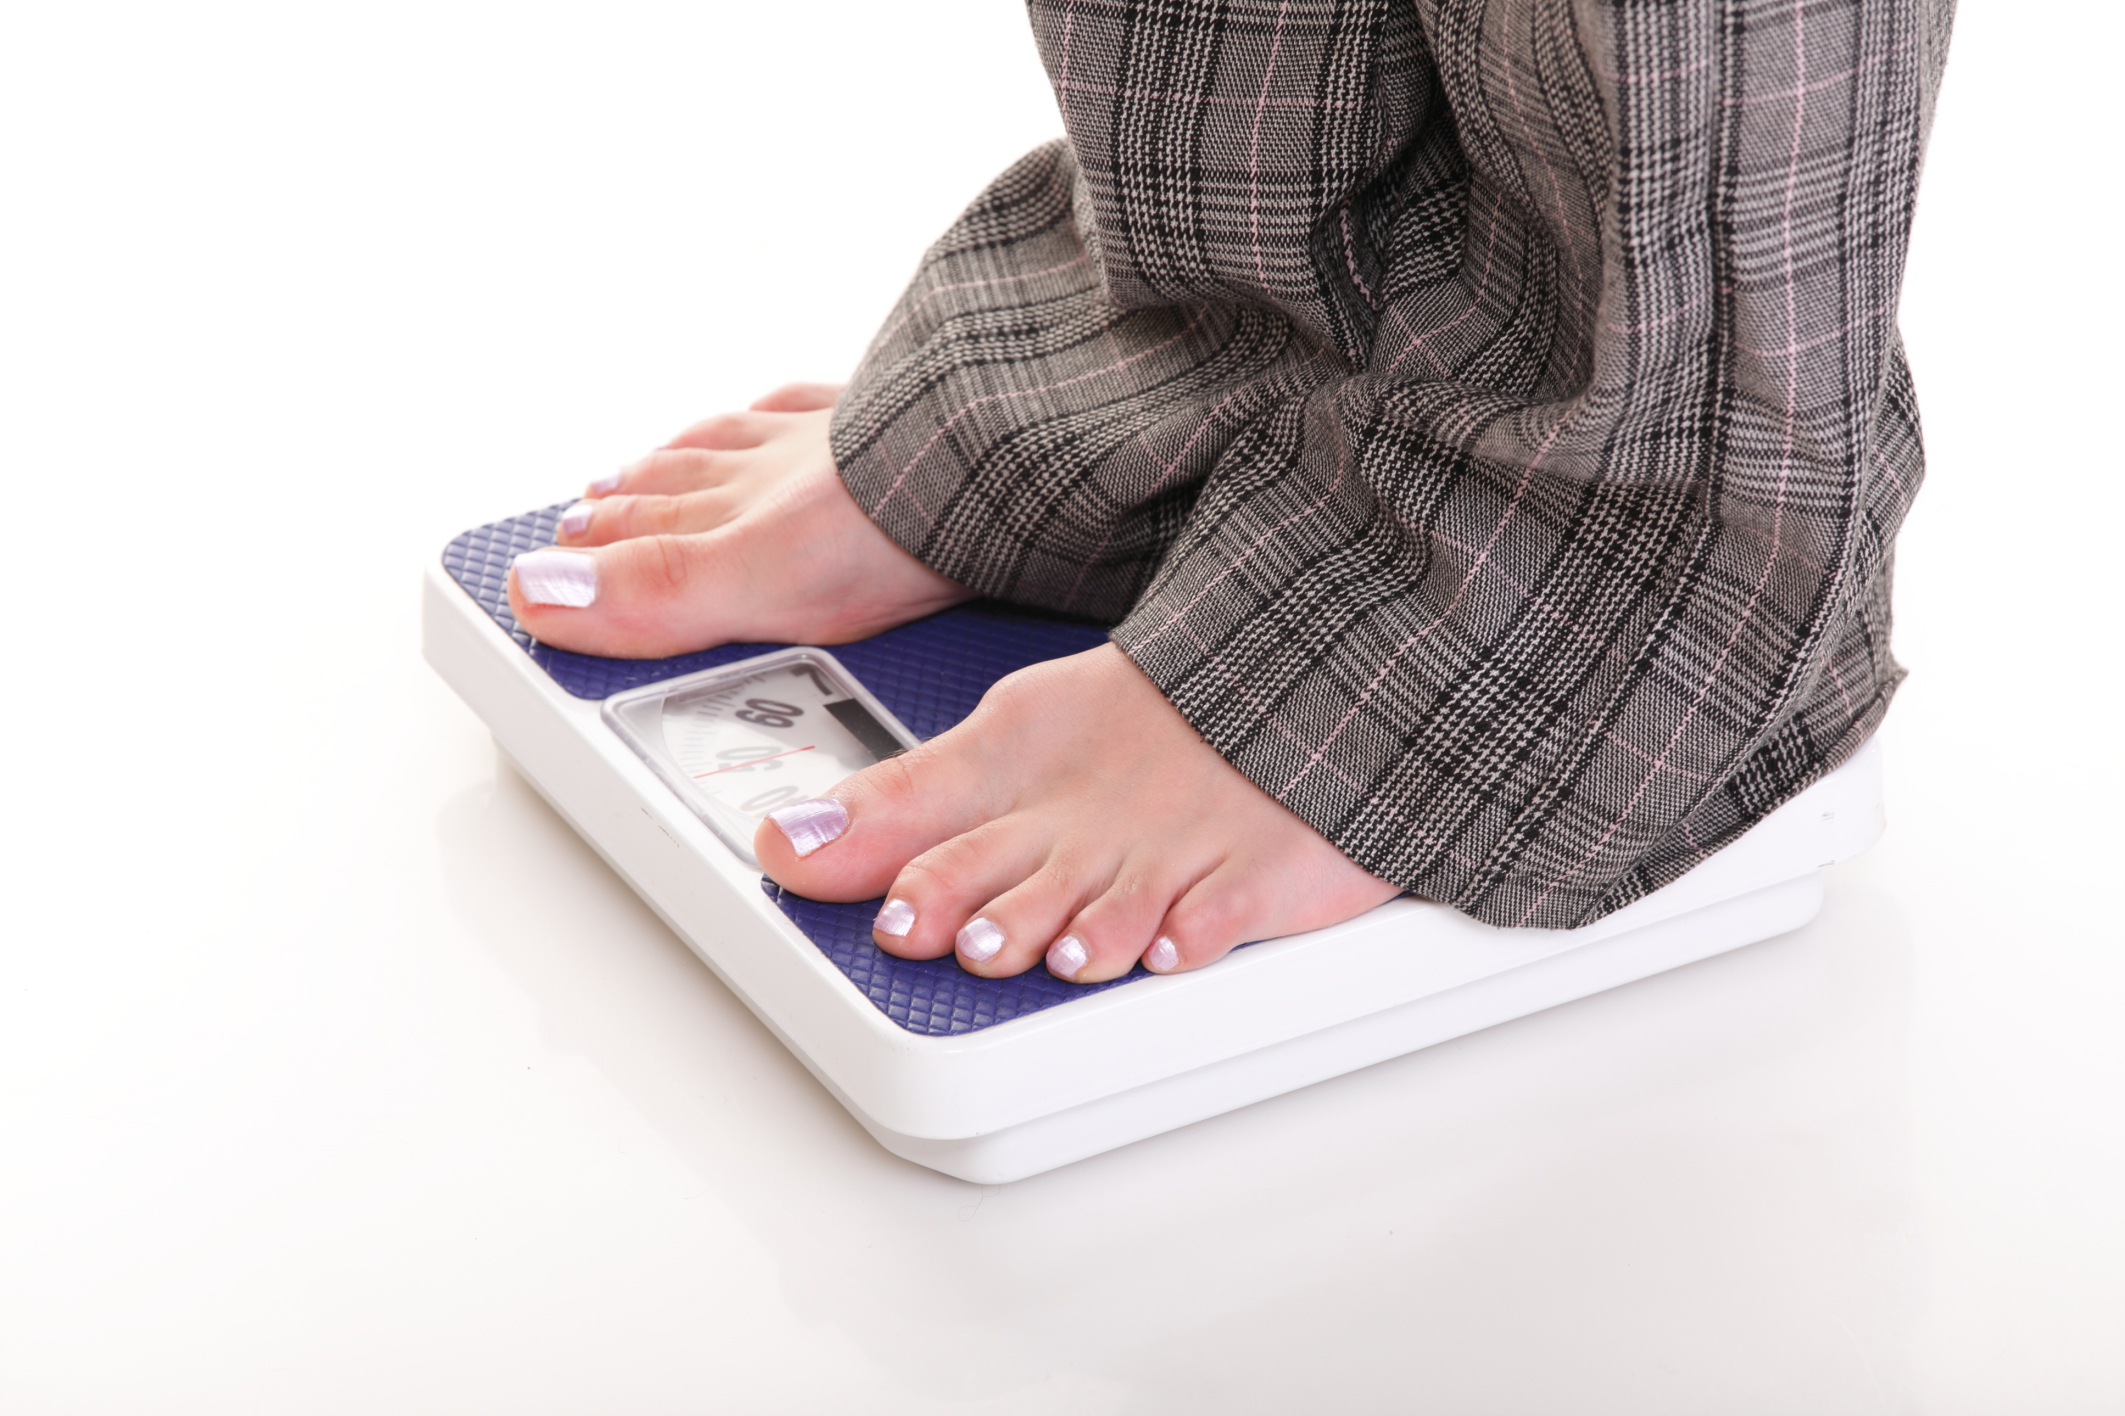 Make these changes to slide off the weight loss plateau - Times of India